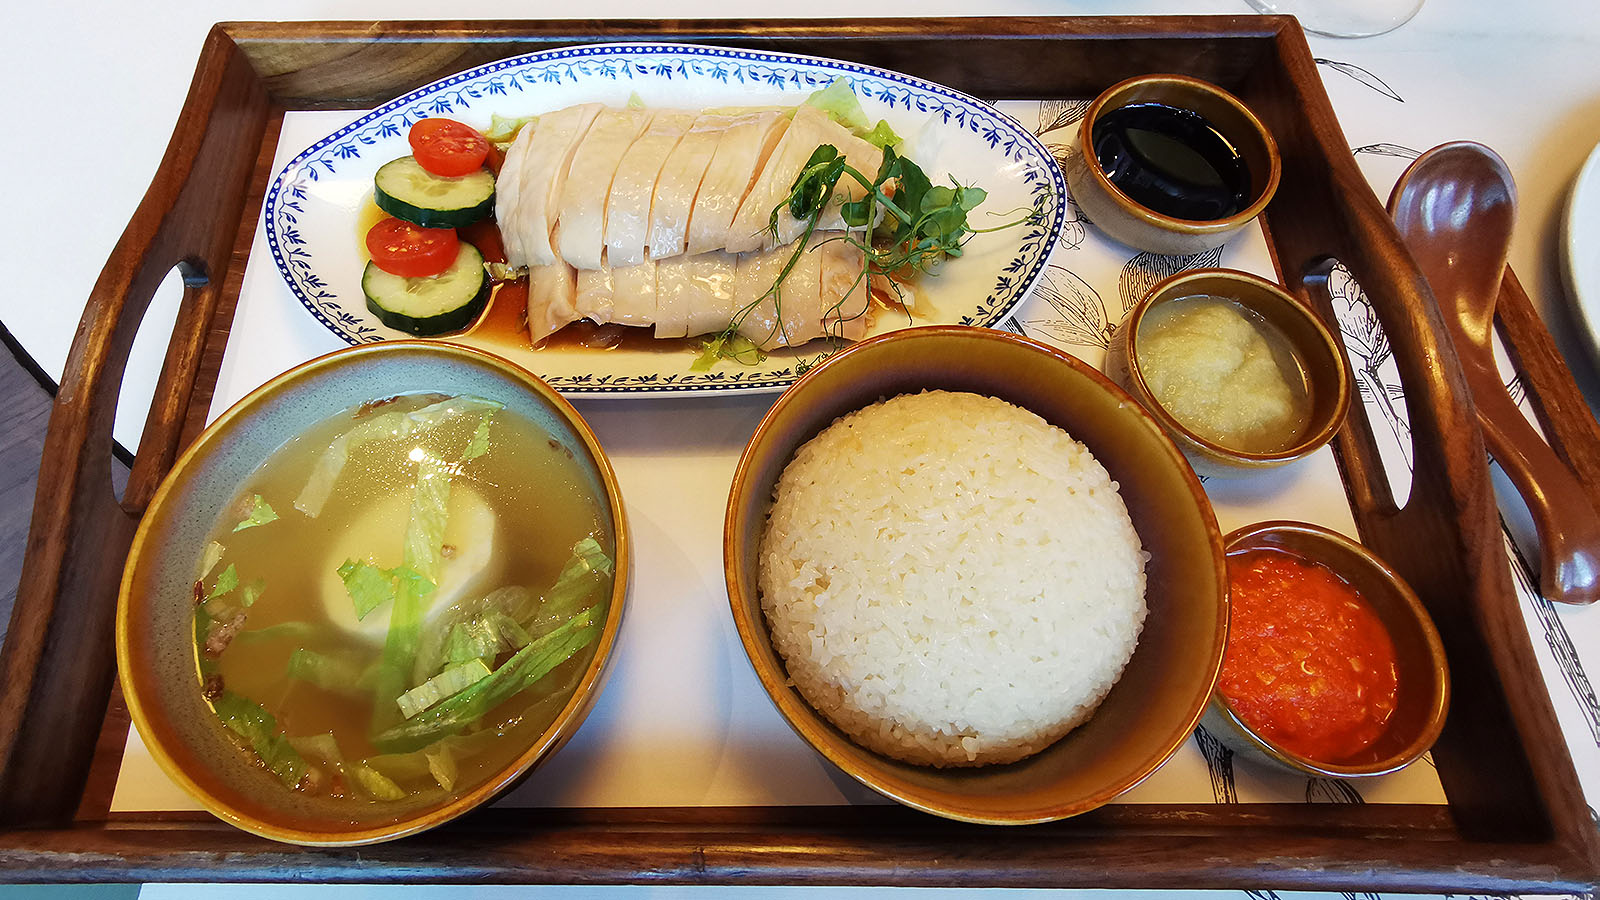 Chicken rice at Hilton Singapore Orchard hotel